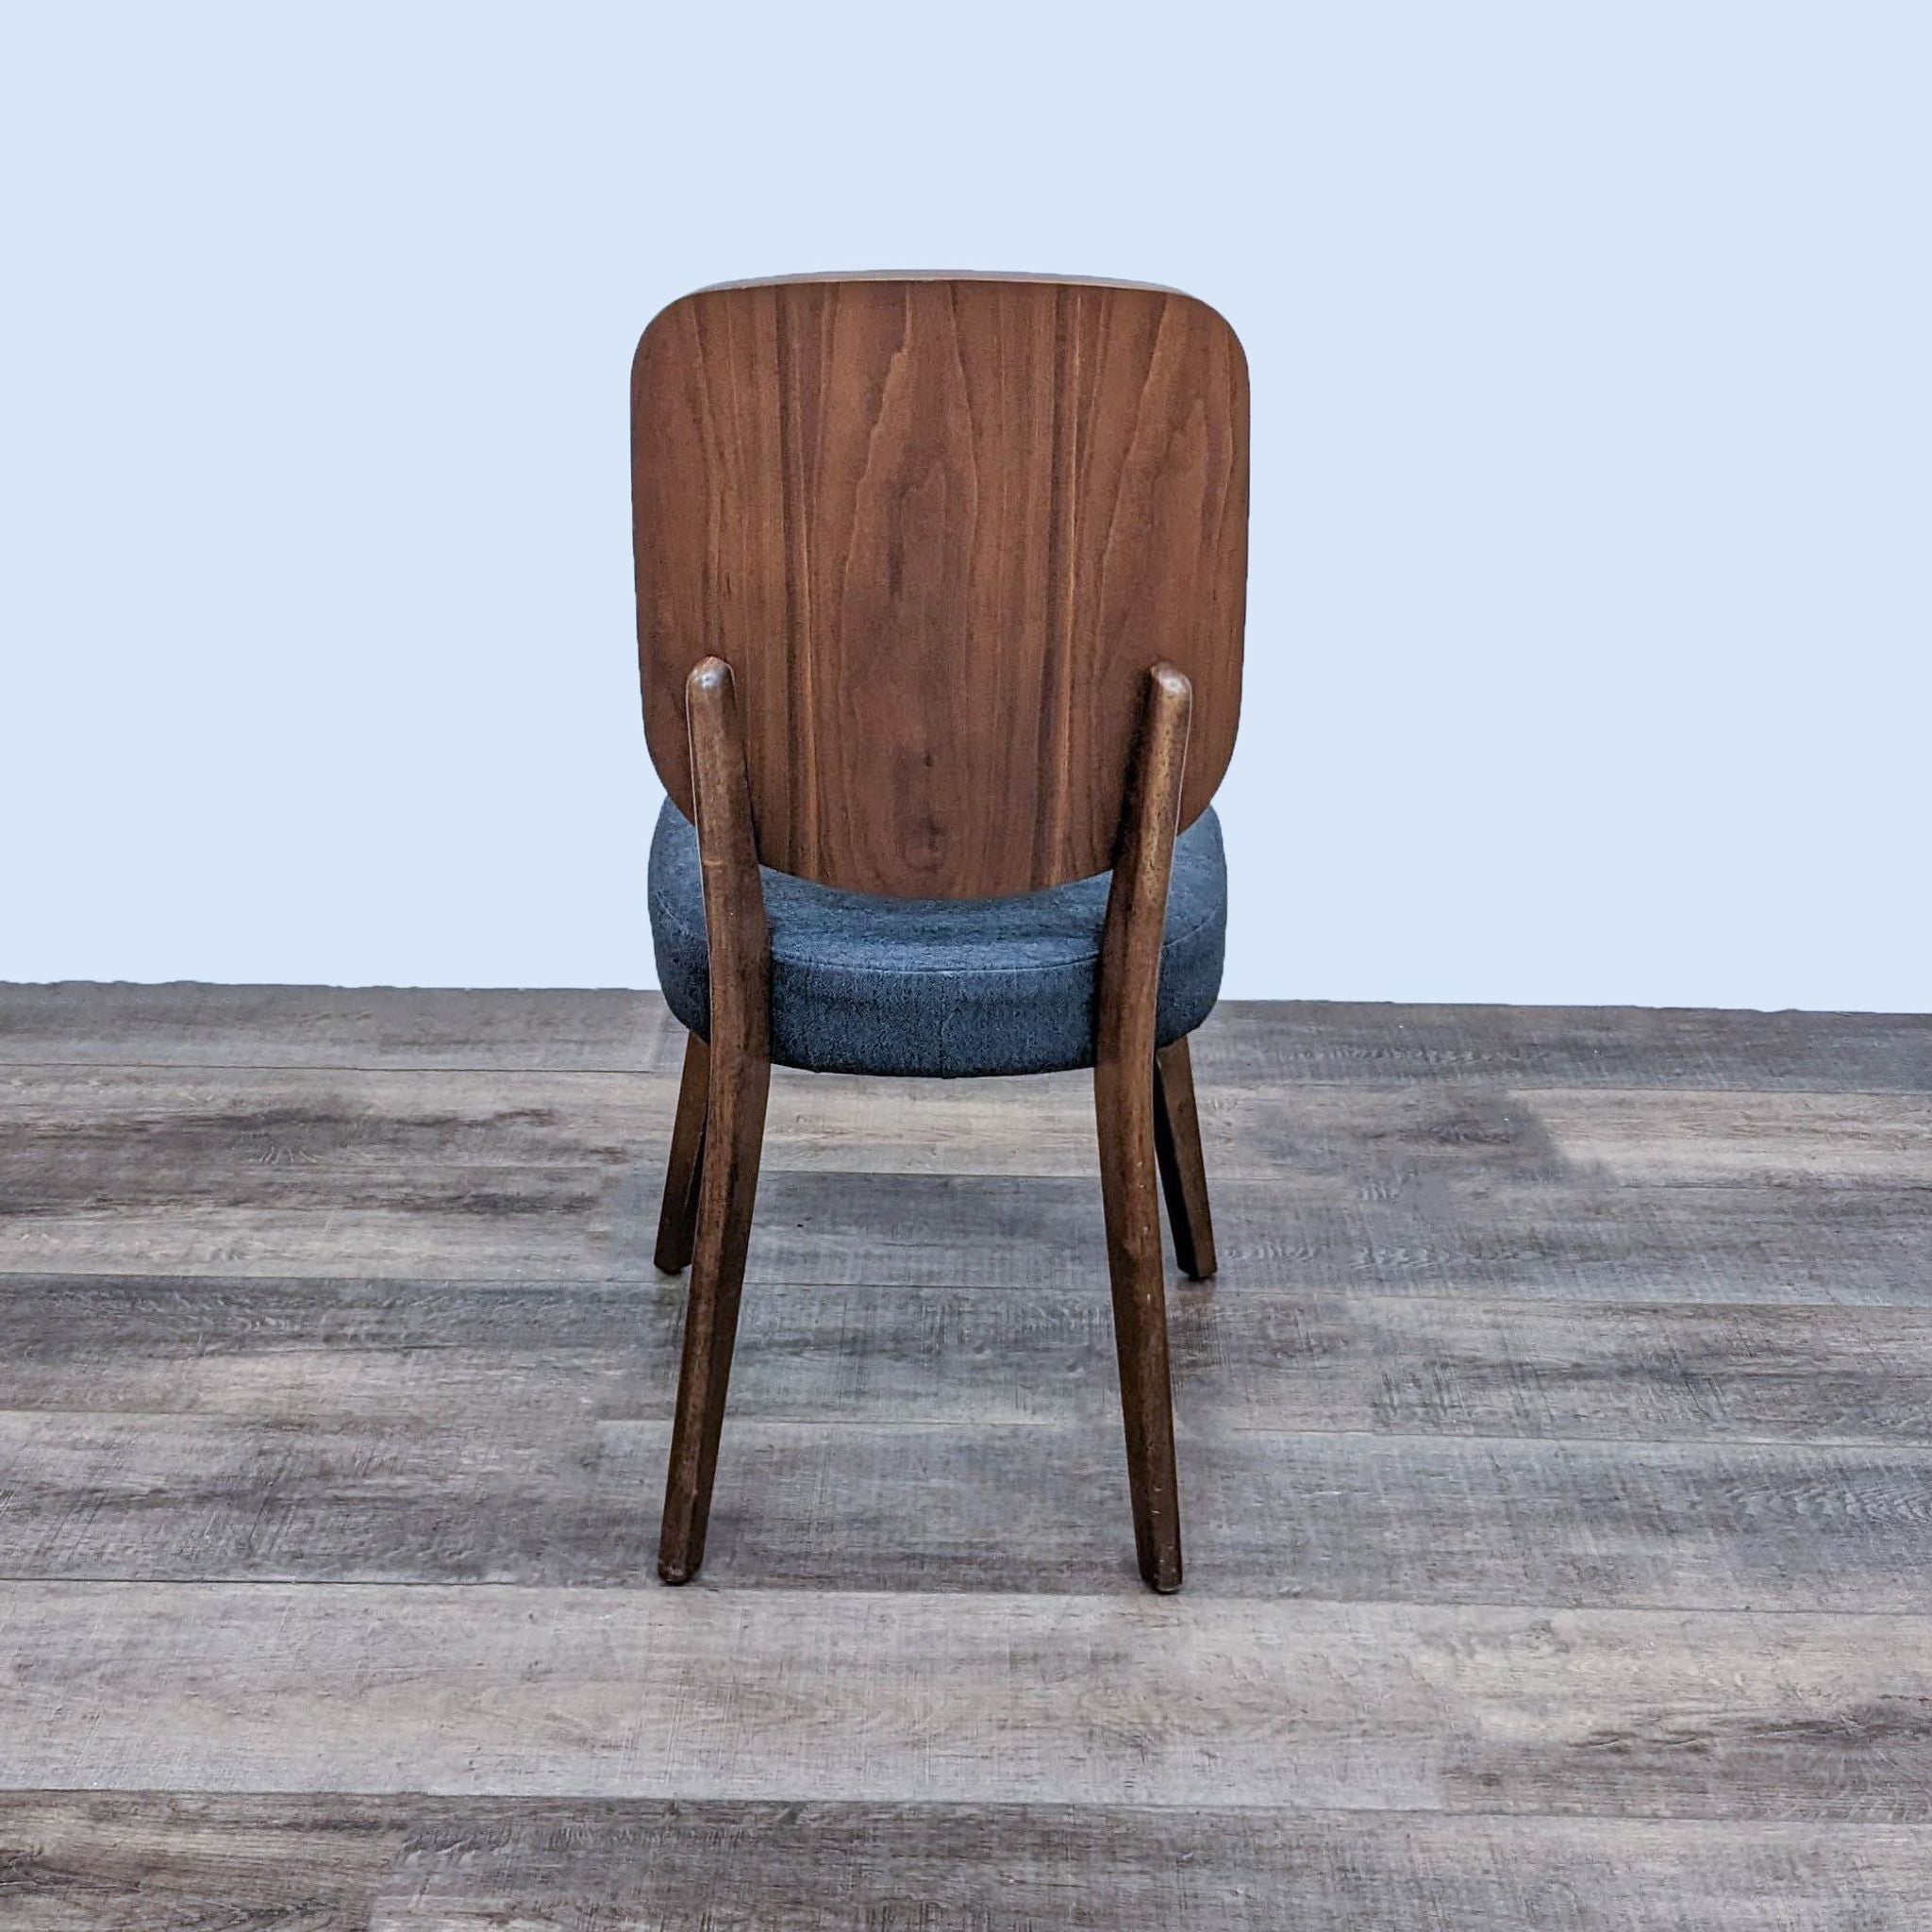 Retro-modern style Zuo Modern Alberta dining chair with curved wooden back and gray cushion on a wooden floor.